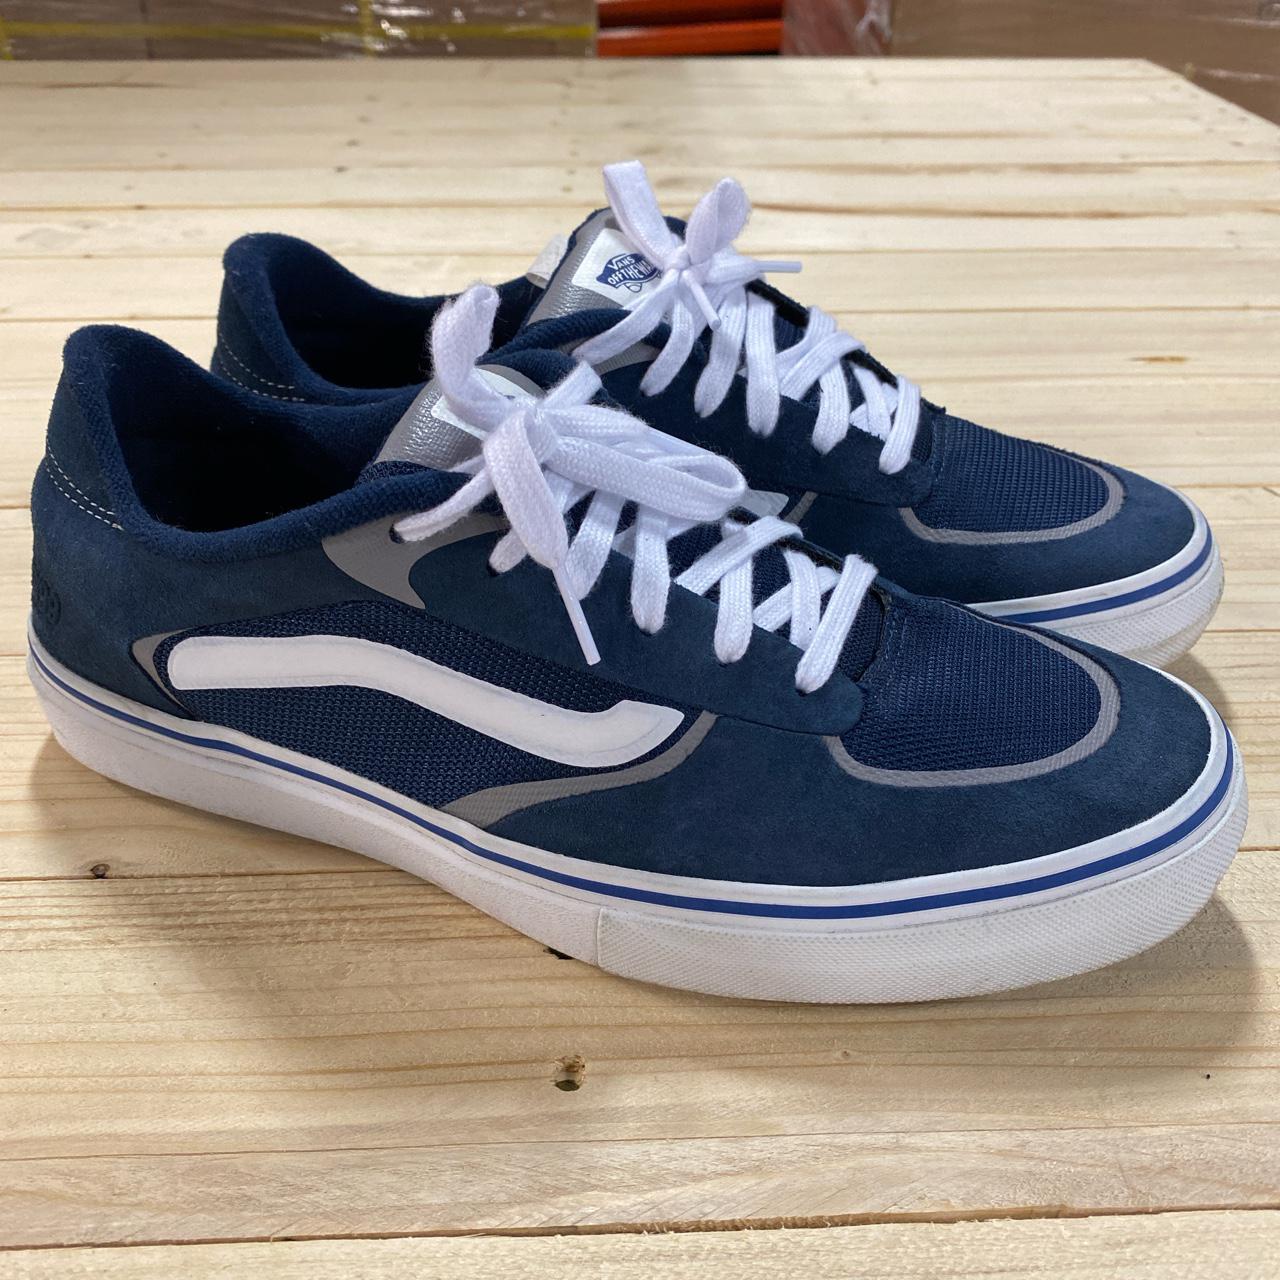 Vans Men's Blue and White Trainers